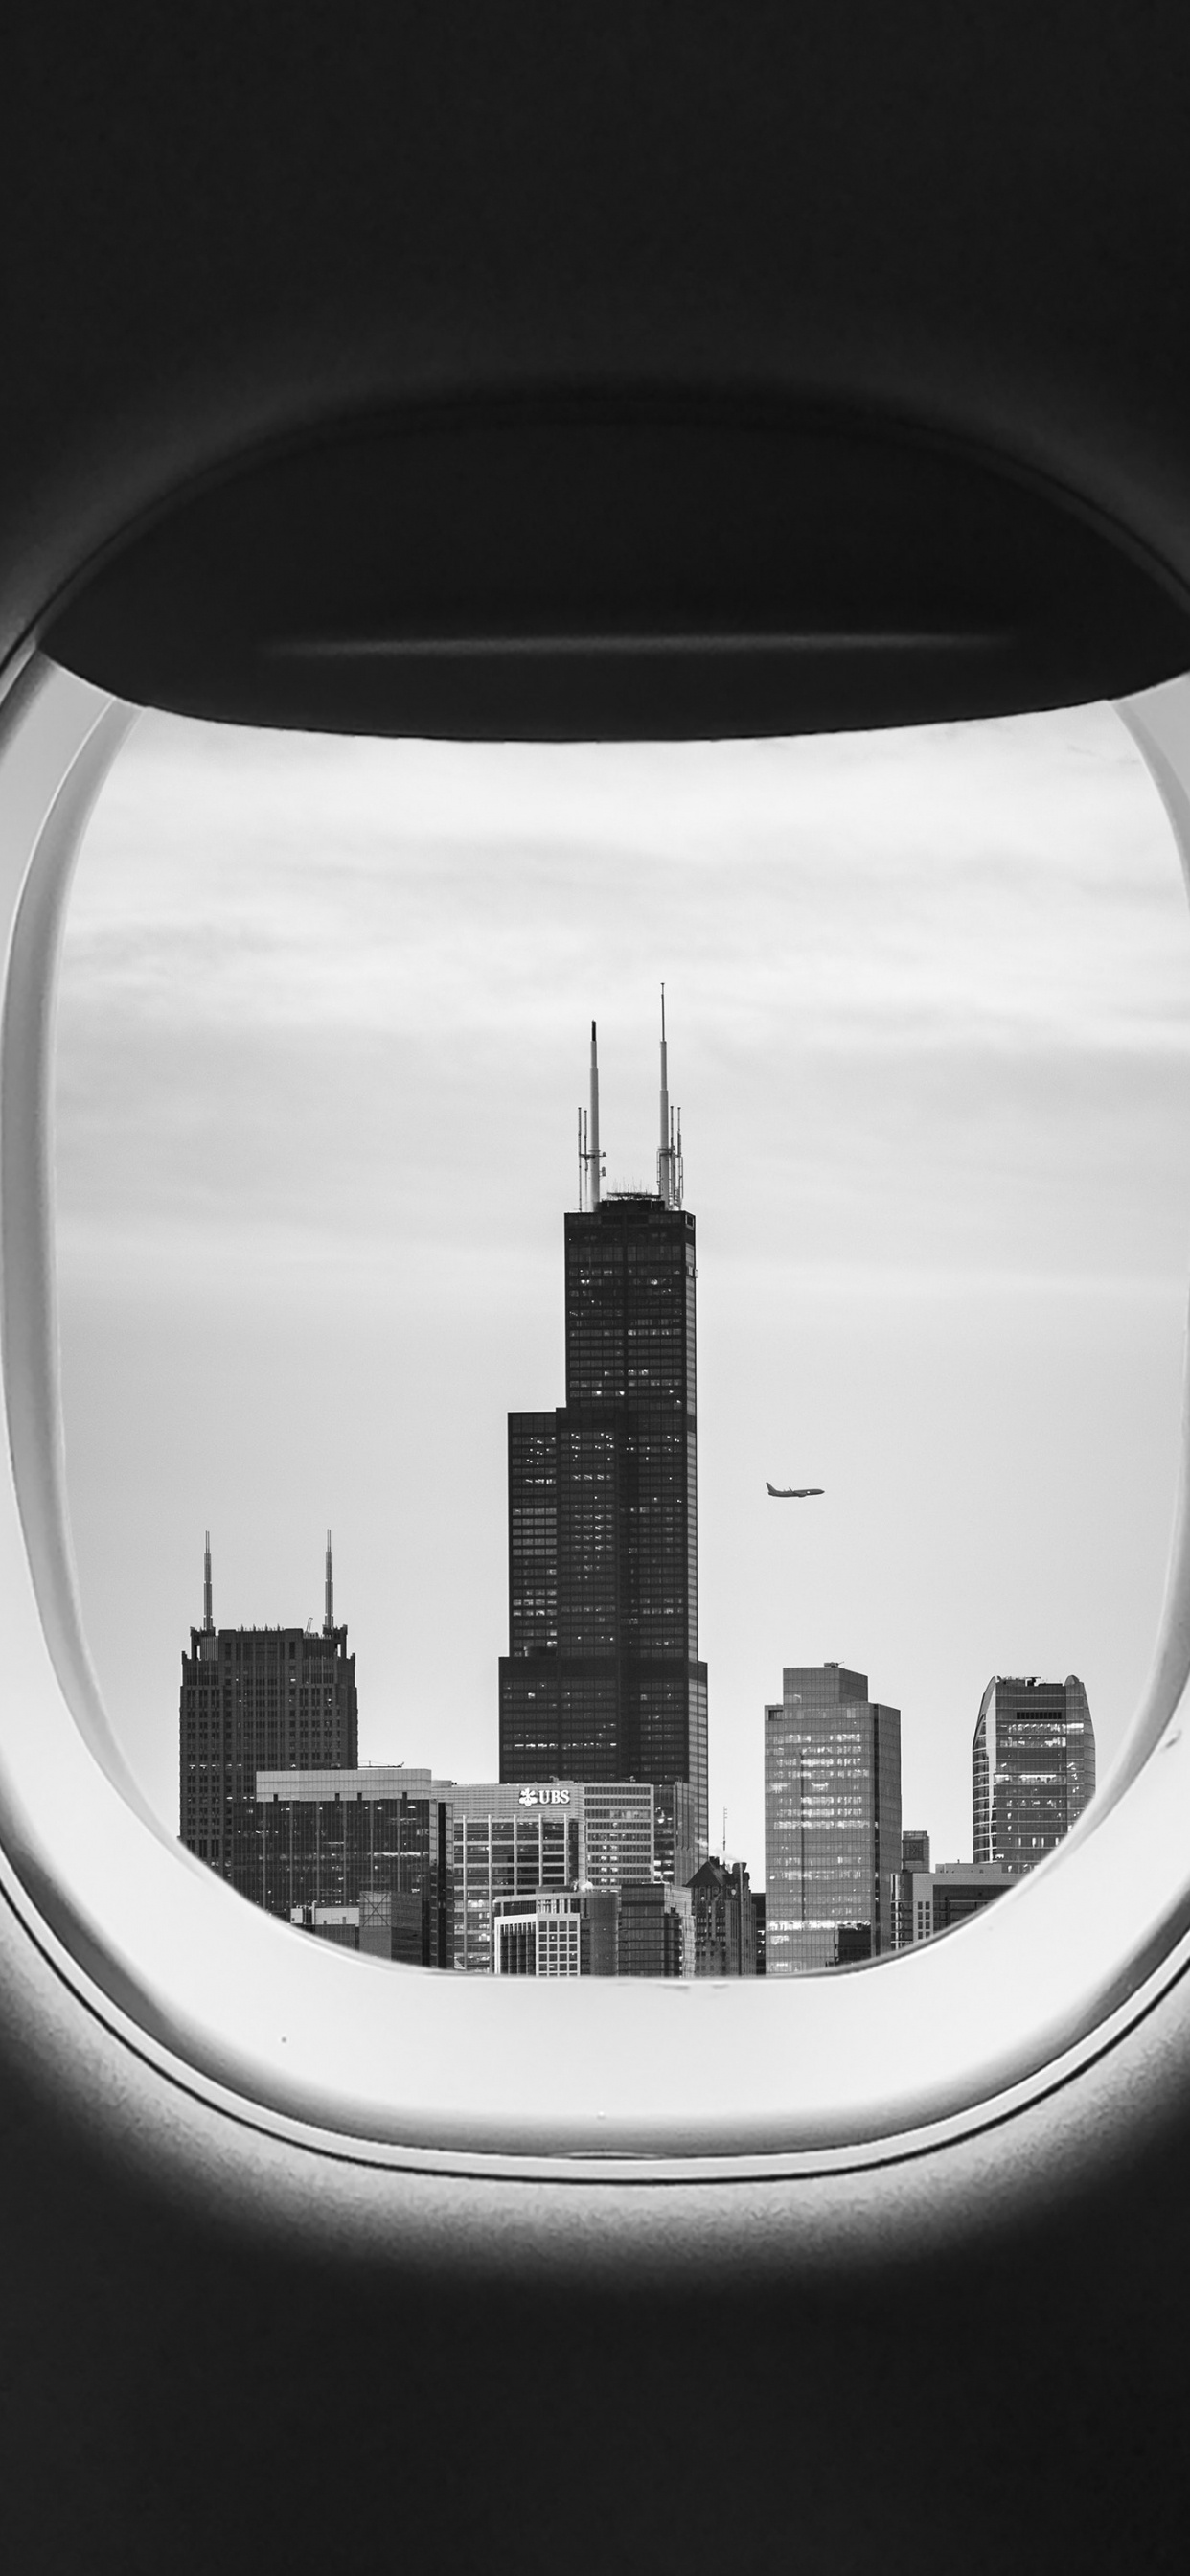 Airplane Window View of City Buildings During Daytime. Wallpaper in 1242x2688 Resolution